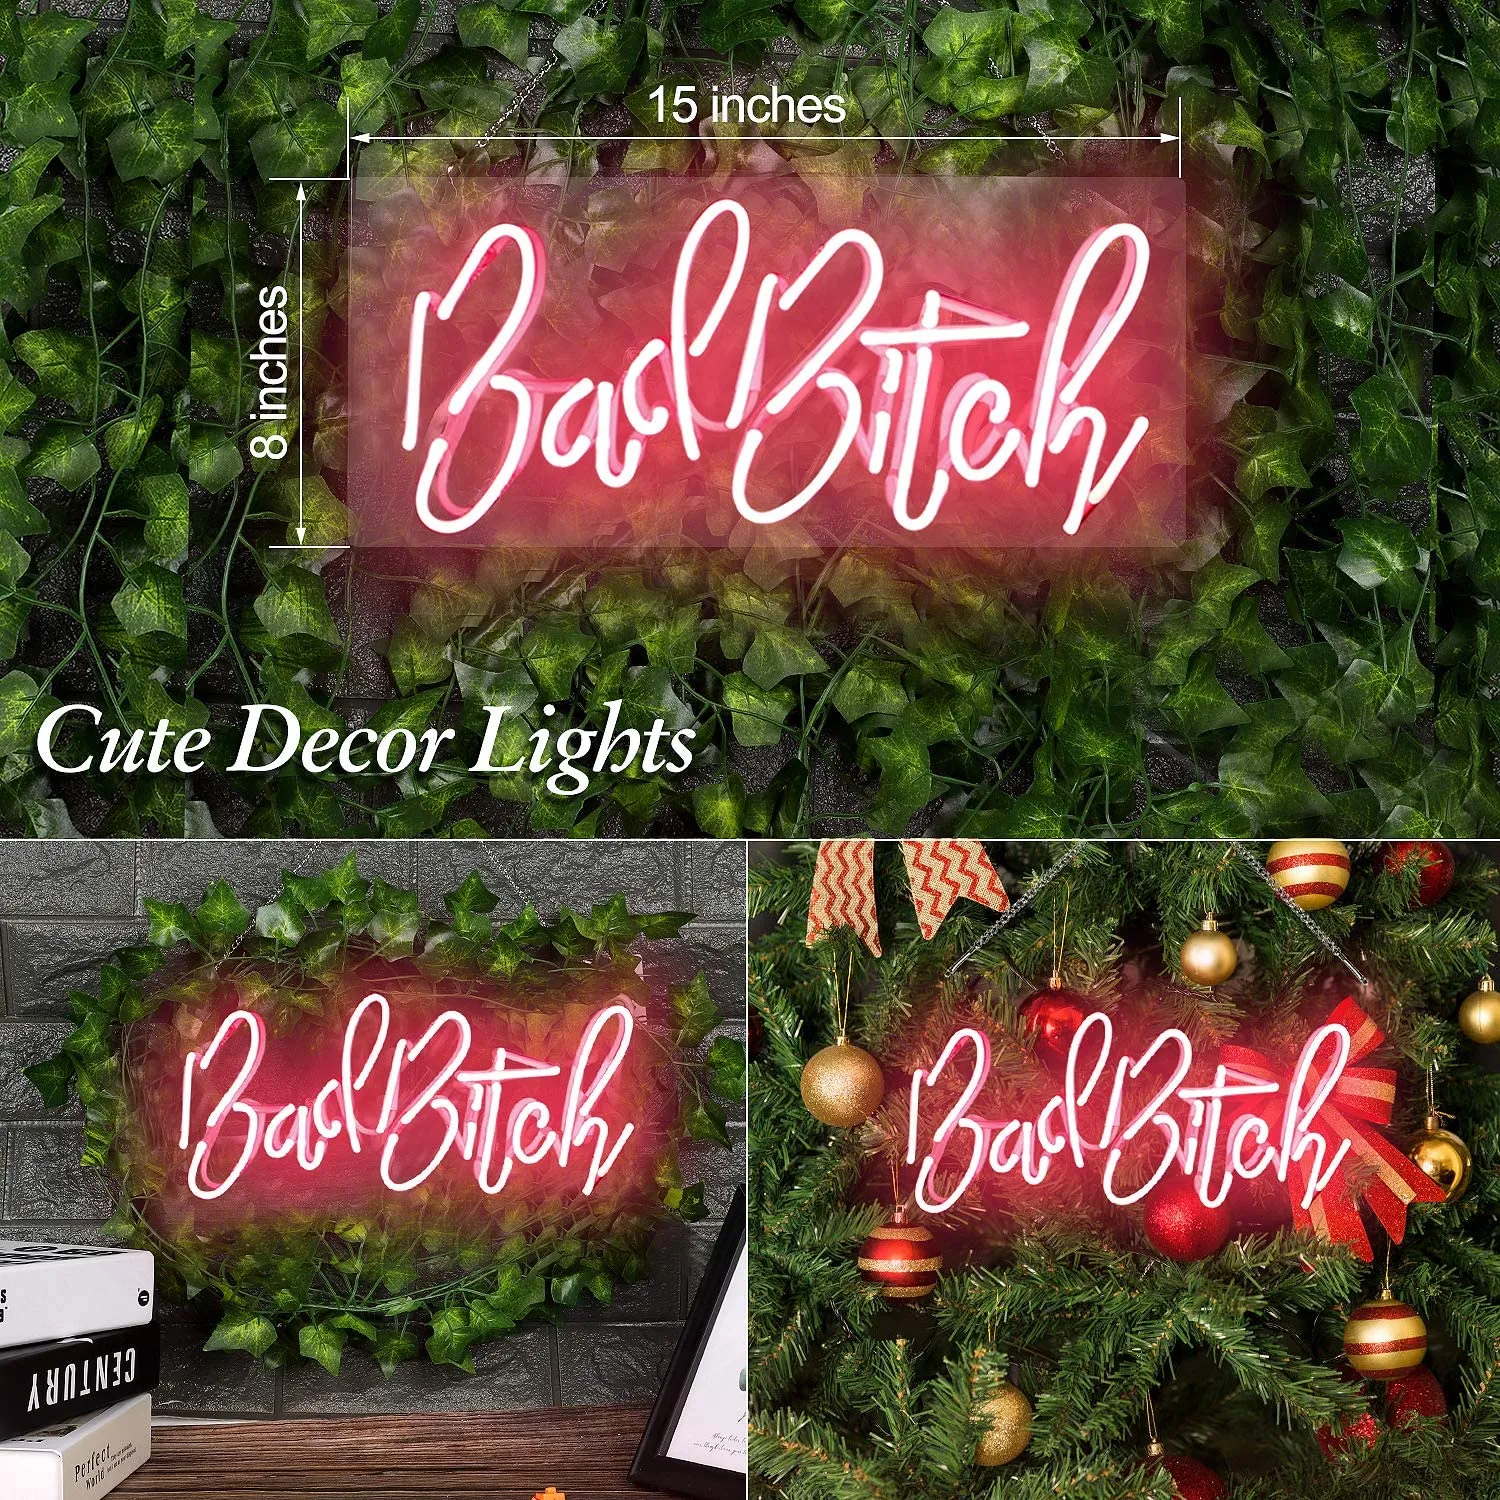 Bad Bitch Real Glass Handmade Neon Wall Signs for Home Light Room Home Bedroom Girls el Beach 15x8 Pouces 236o